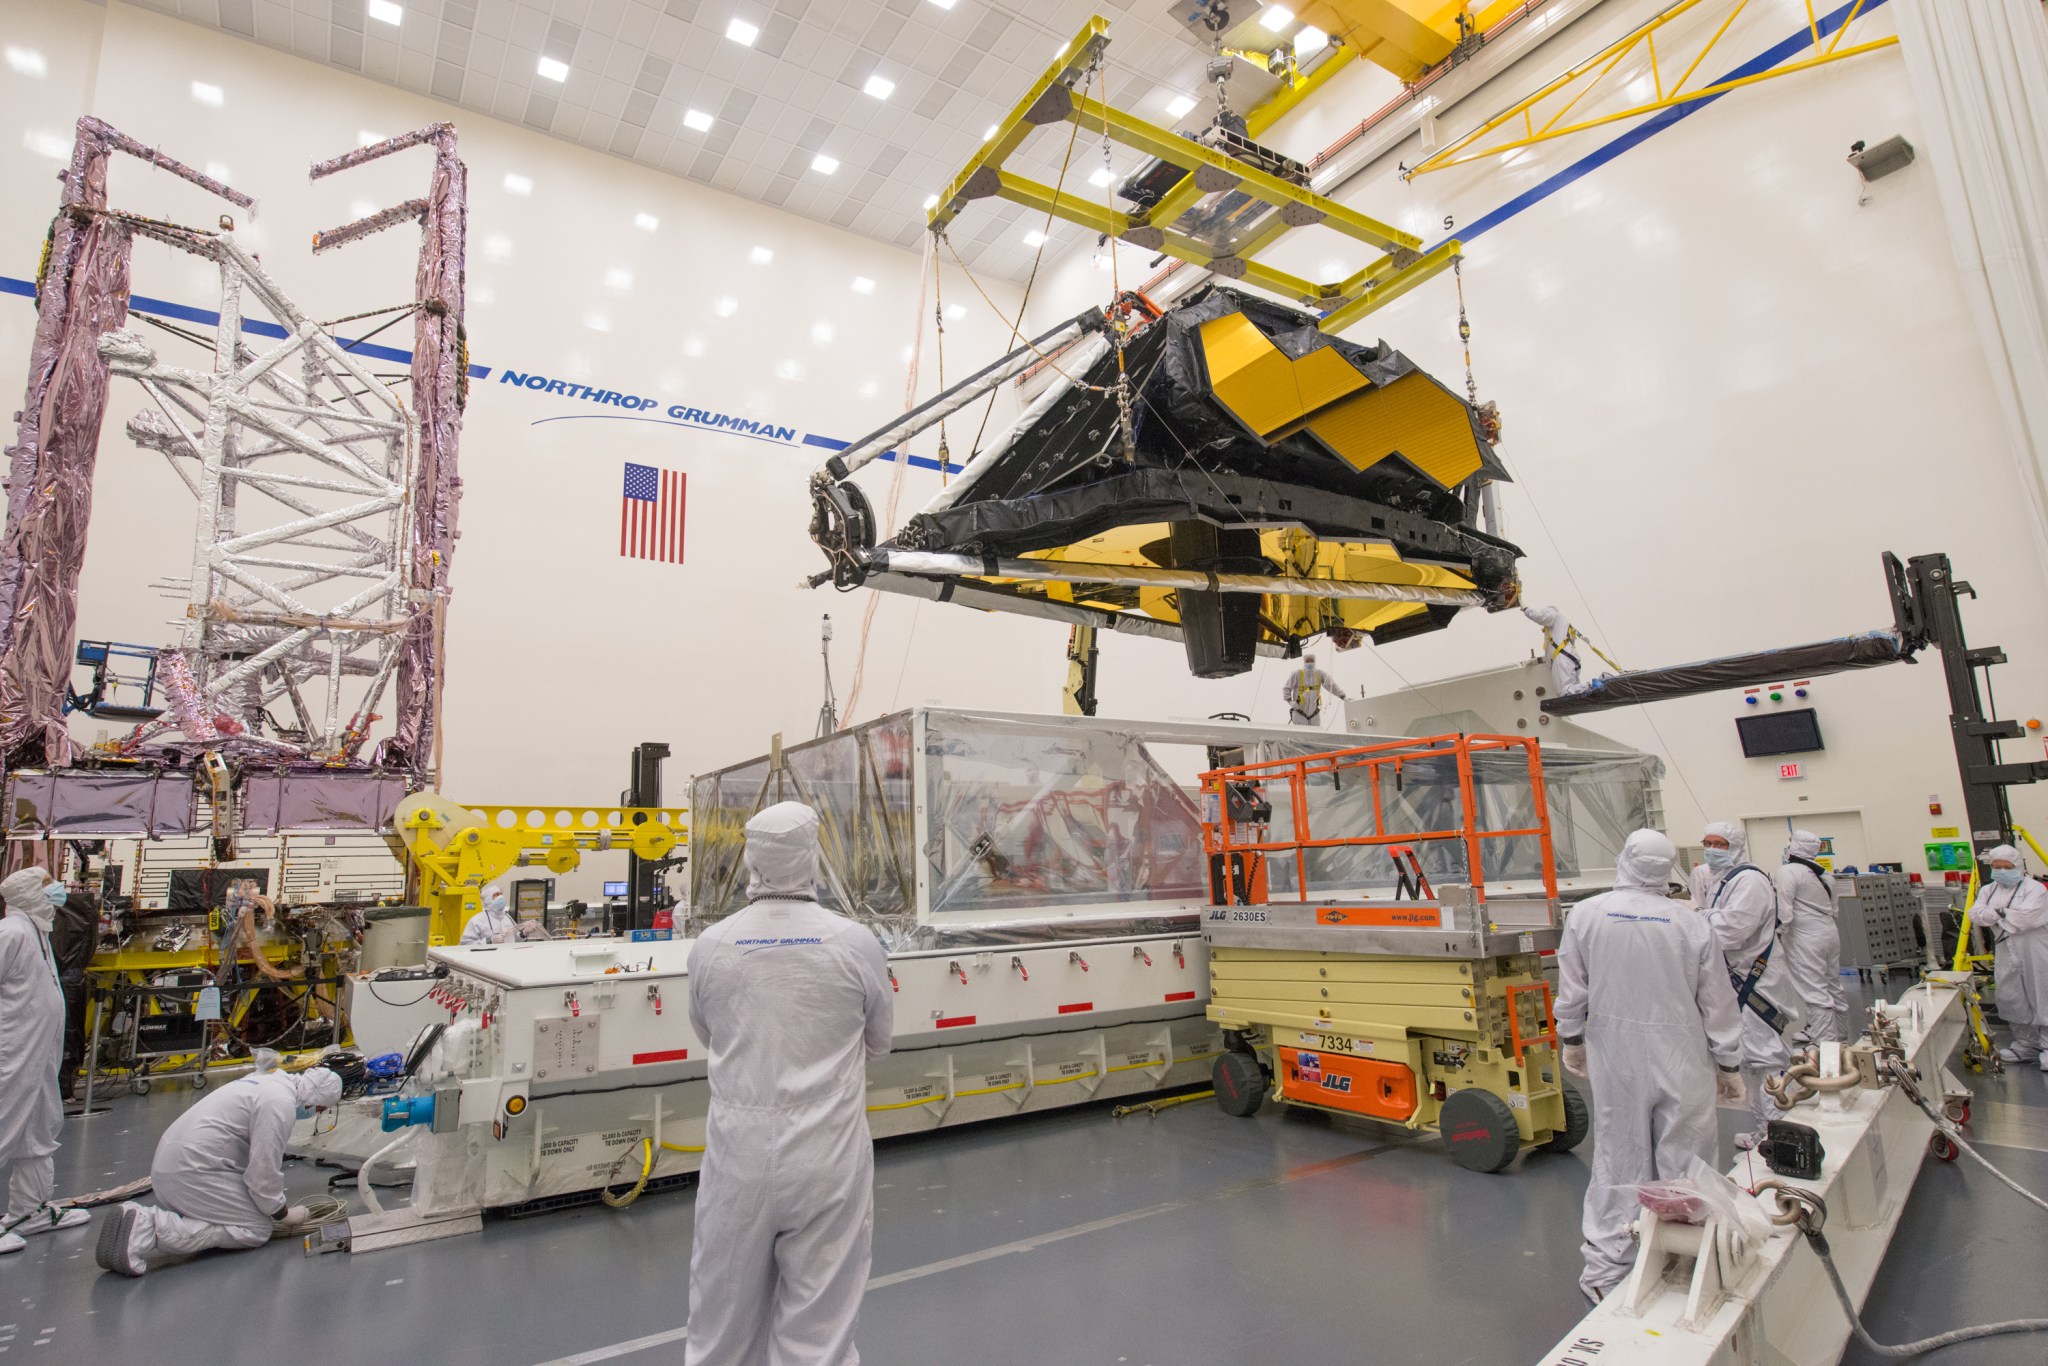 With all flight components under one roof, technicians and engineers work to prepare the two halves of the JWST.